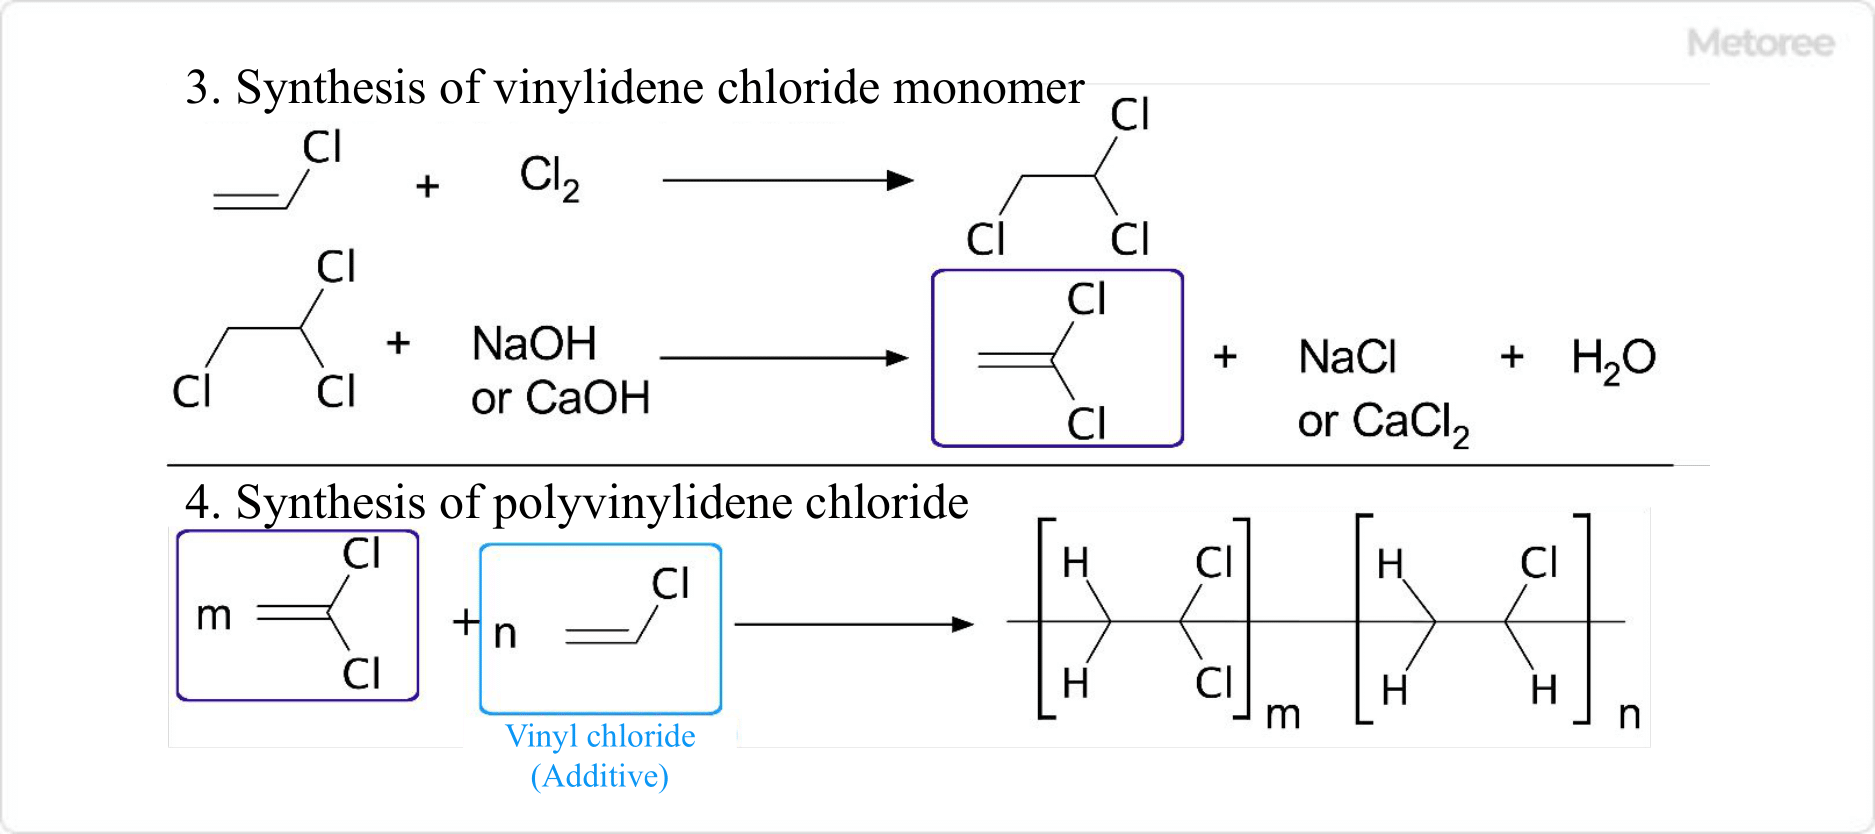 Figure 3. Synthesis of polyvinylidene chloride - 2